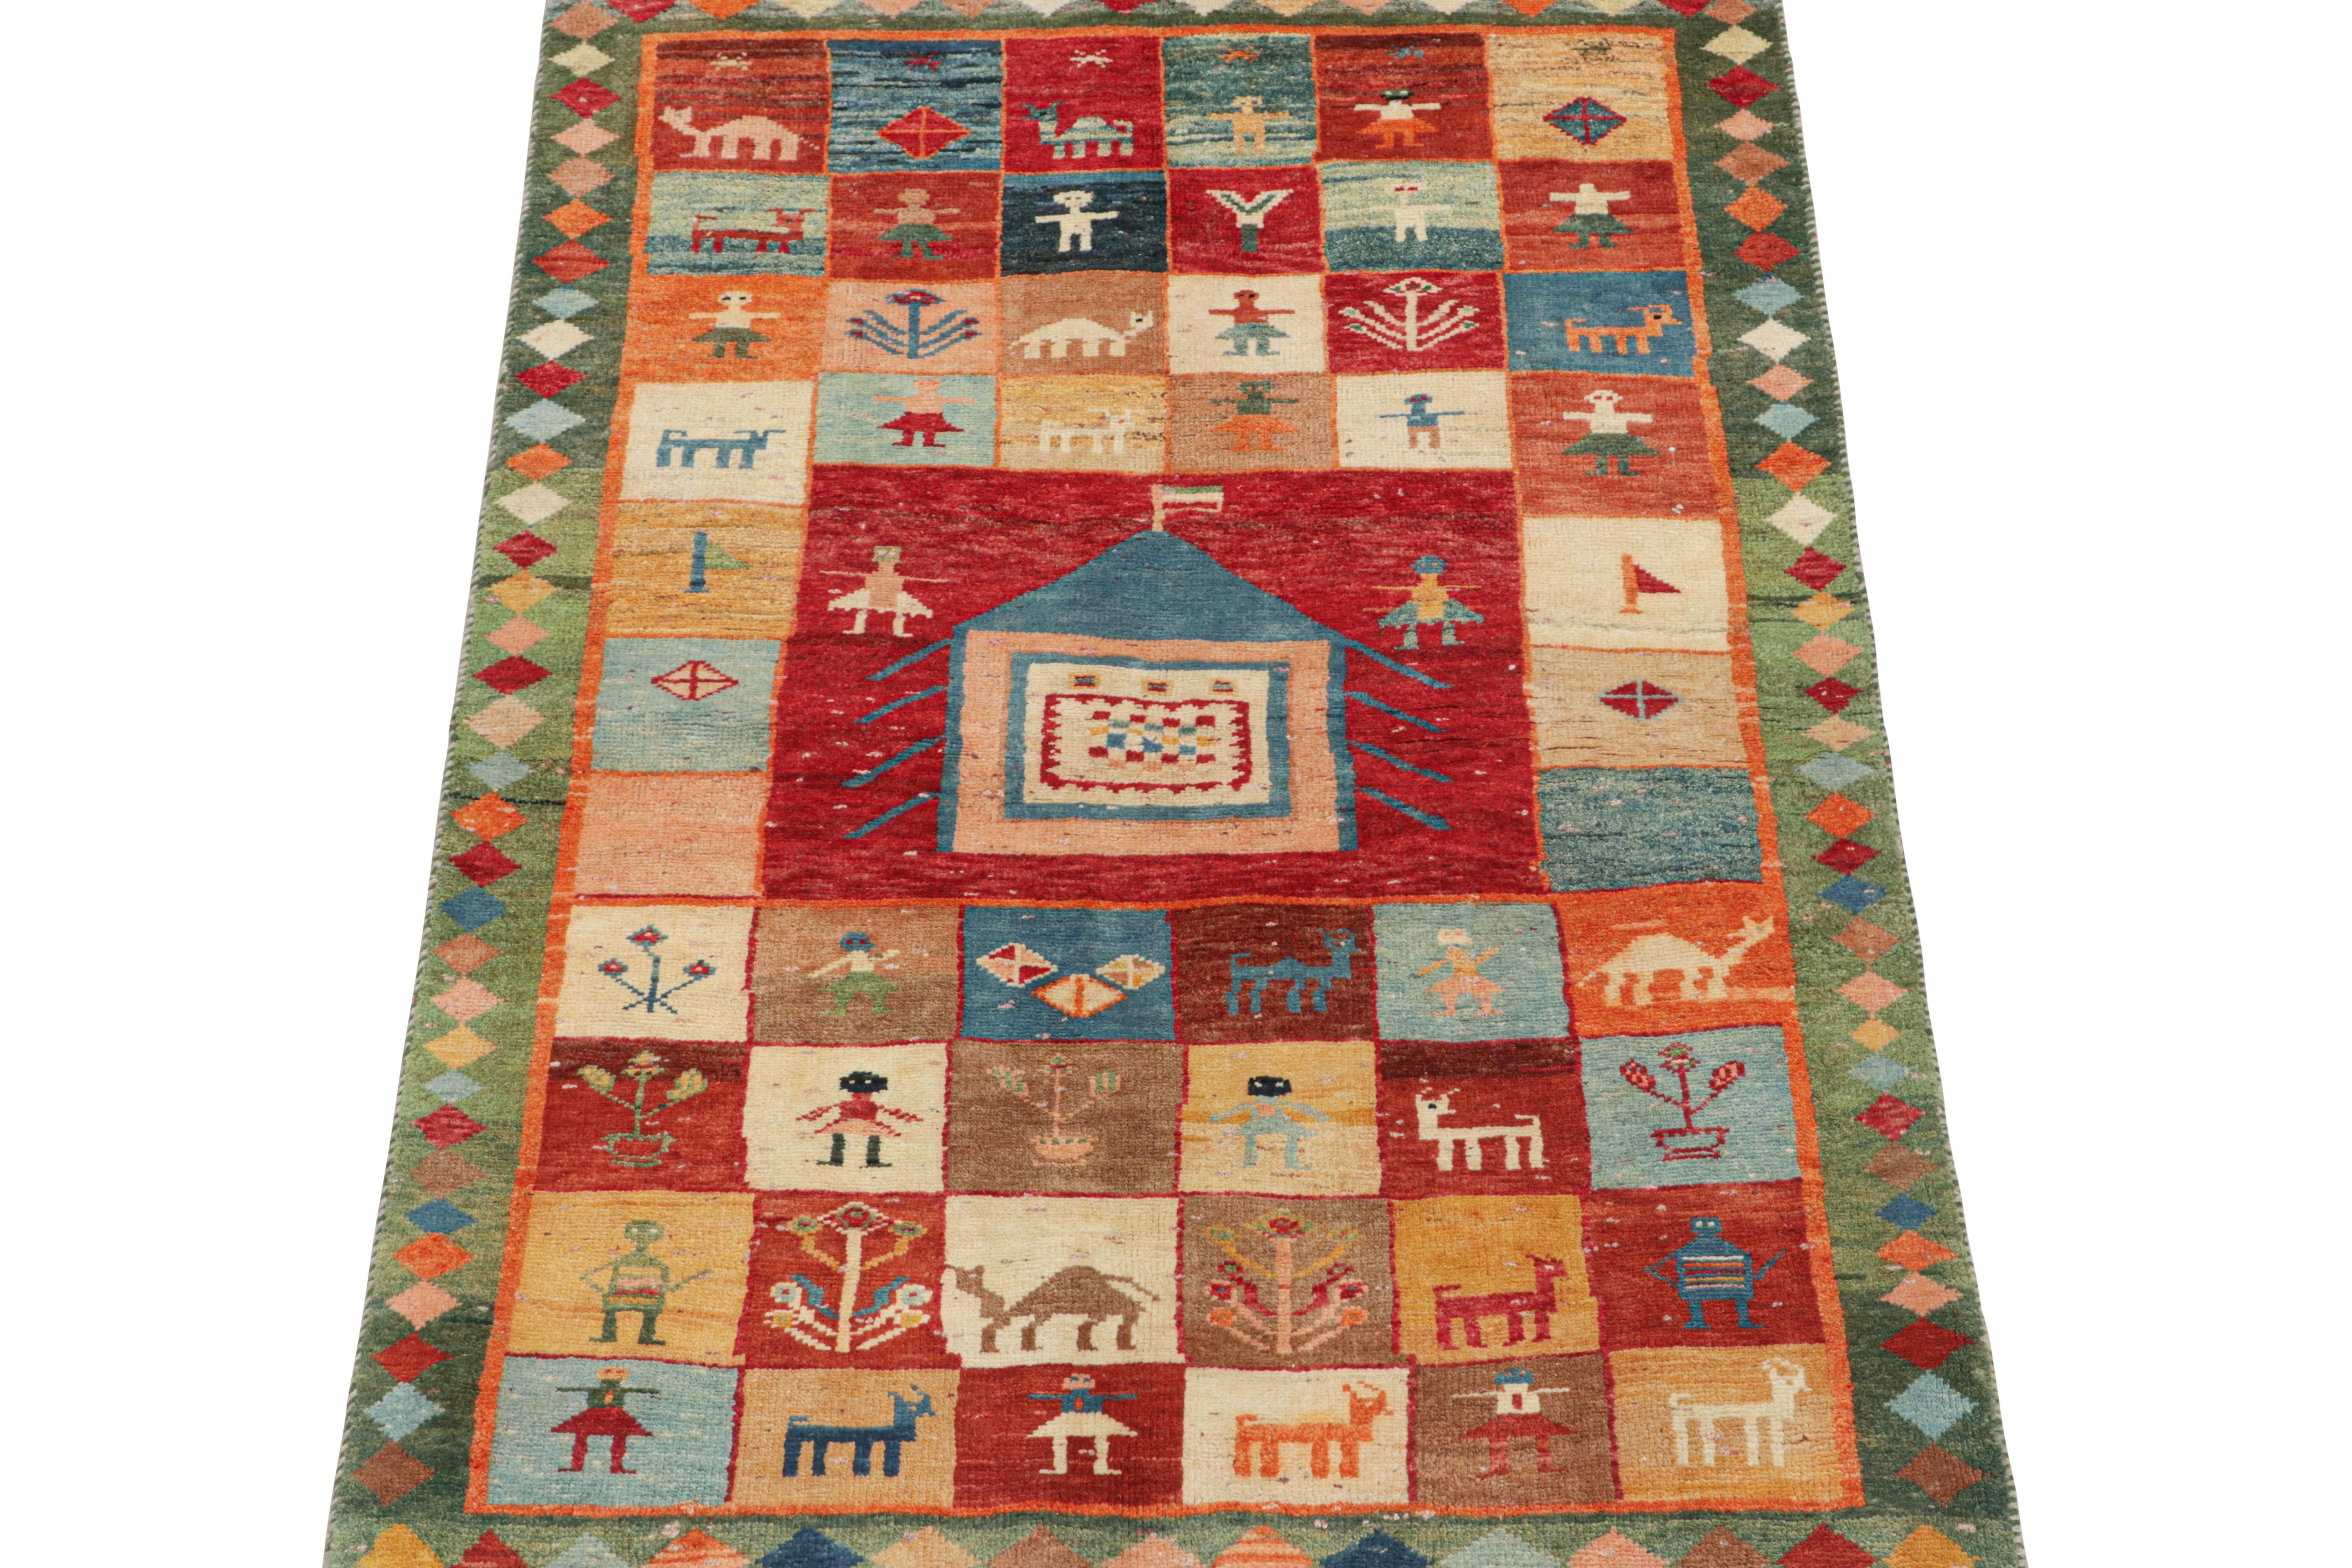 This vintage 4 x 6 Persian rug is a rare tribal piece, hand-knotted in wool circa 1950-1960.

Further on the Design: 

Its design enjoys many pictorial patterns in a series of squares throughout the field. Connoisseurs will further note how few